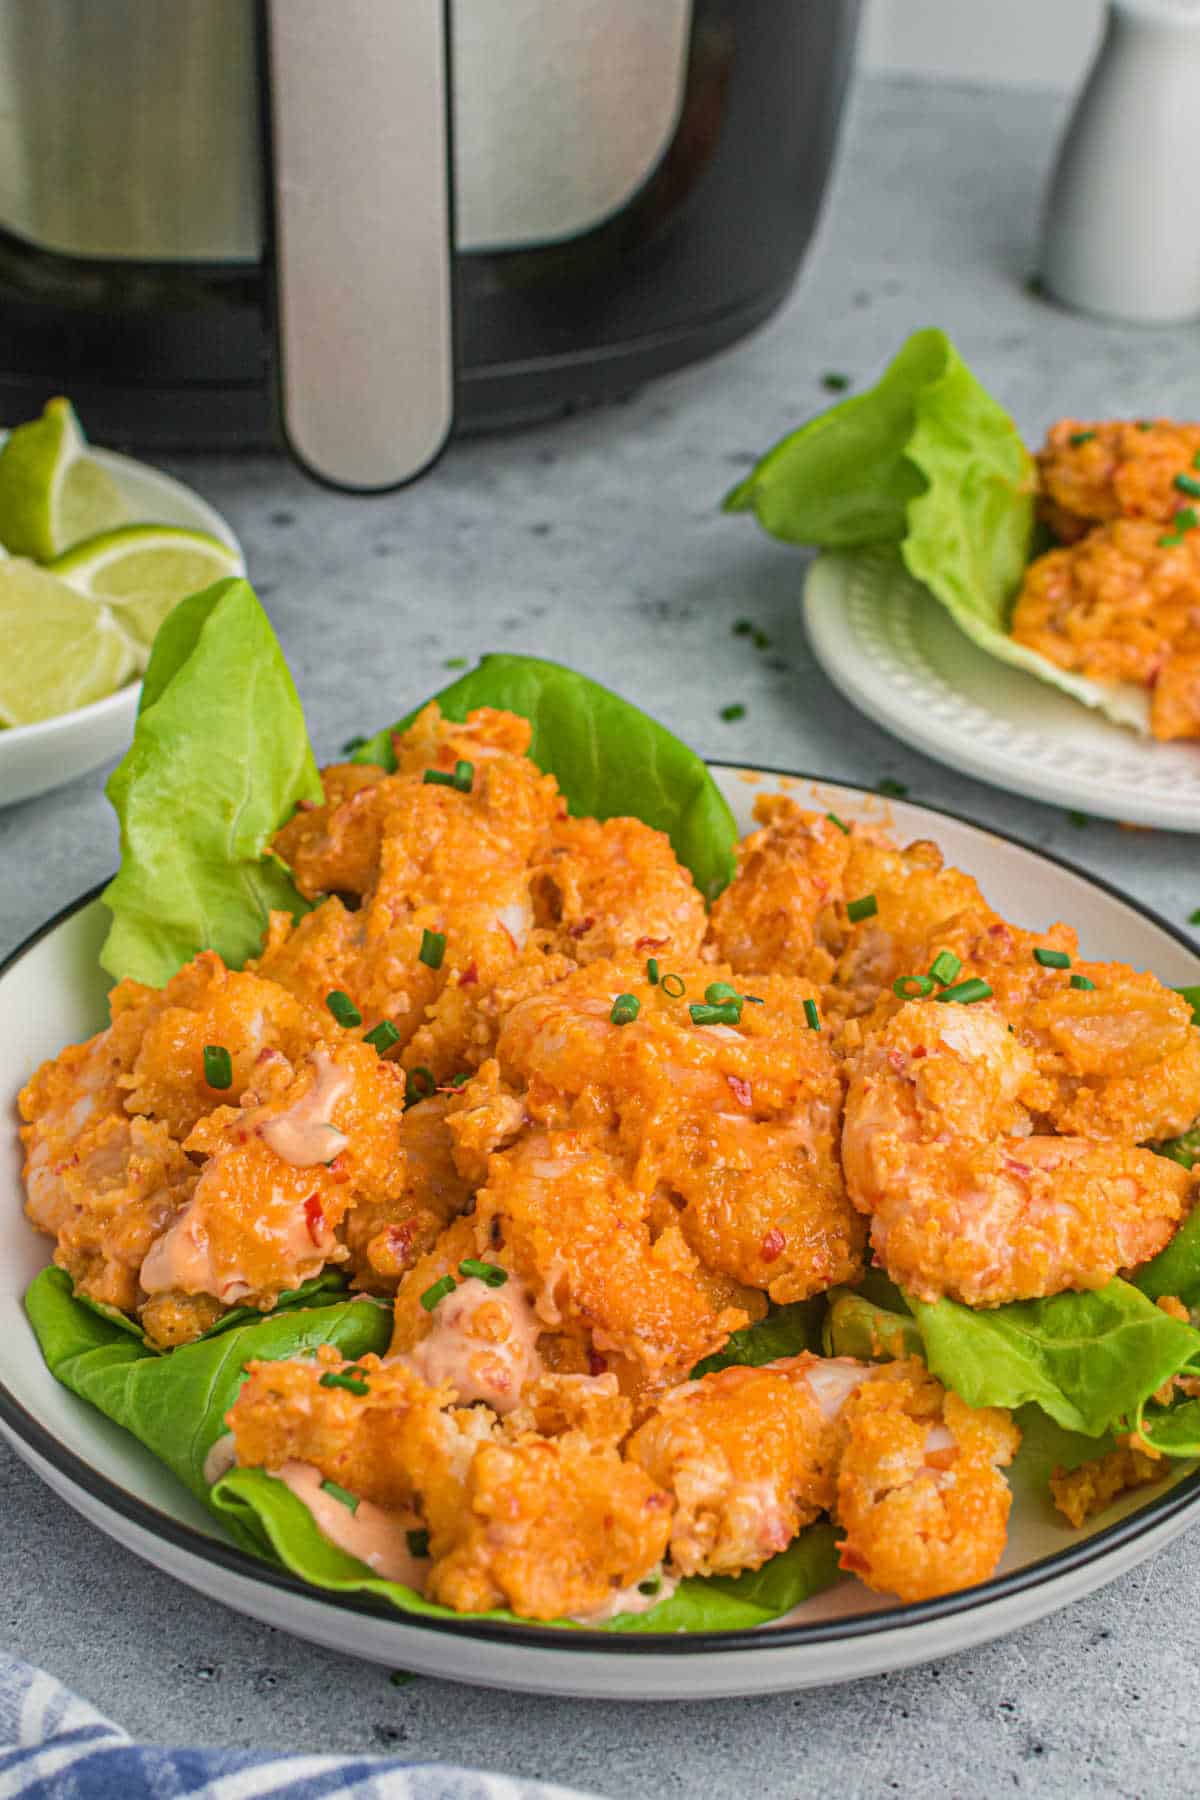 A plate of bang bang shrimp on a bed of lettuce.